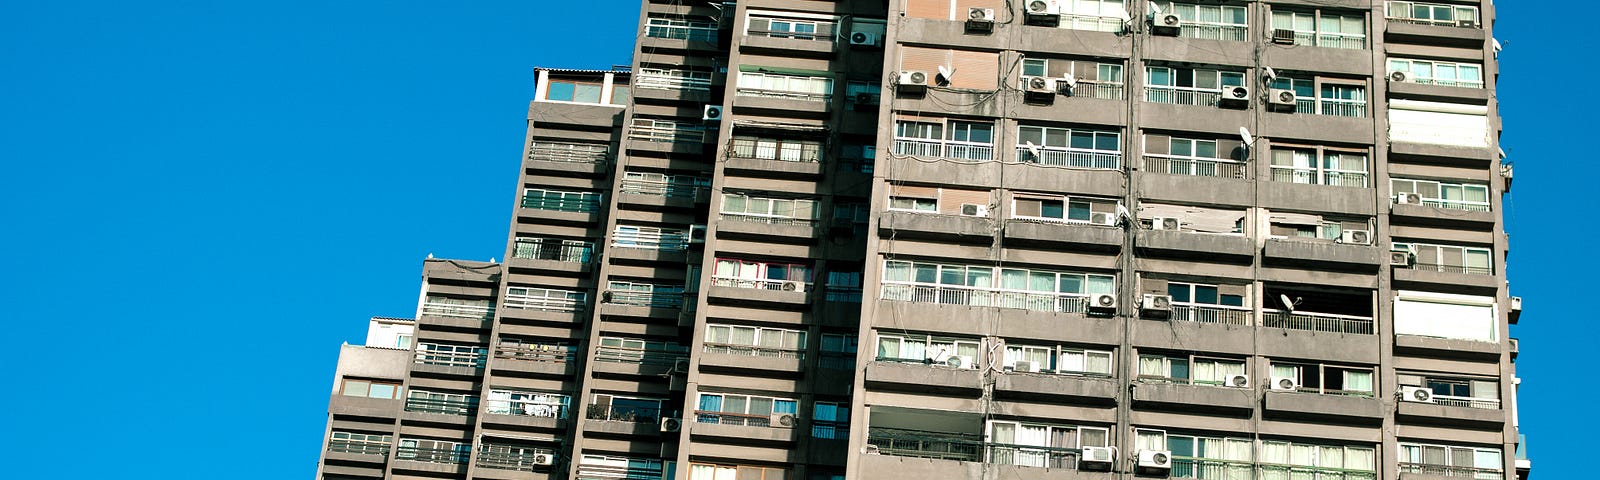 An tower block of apartments